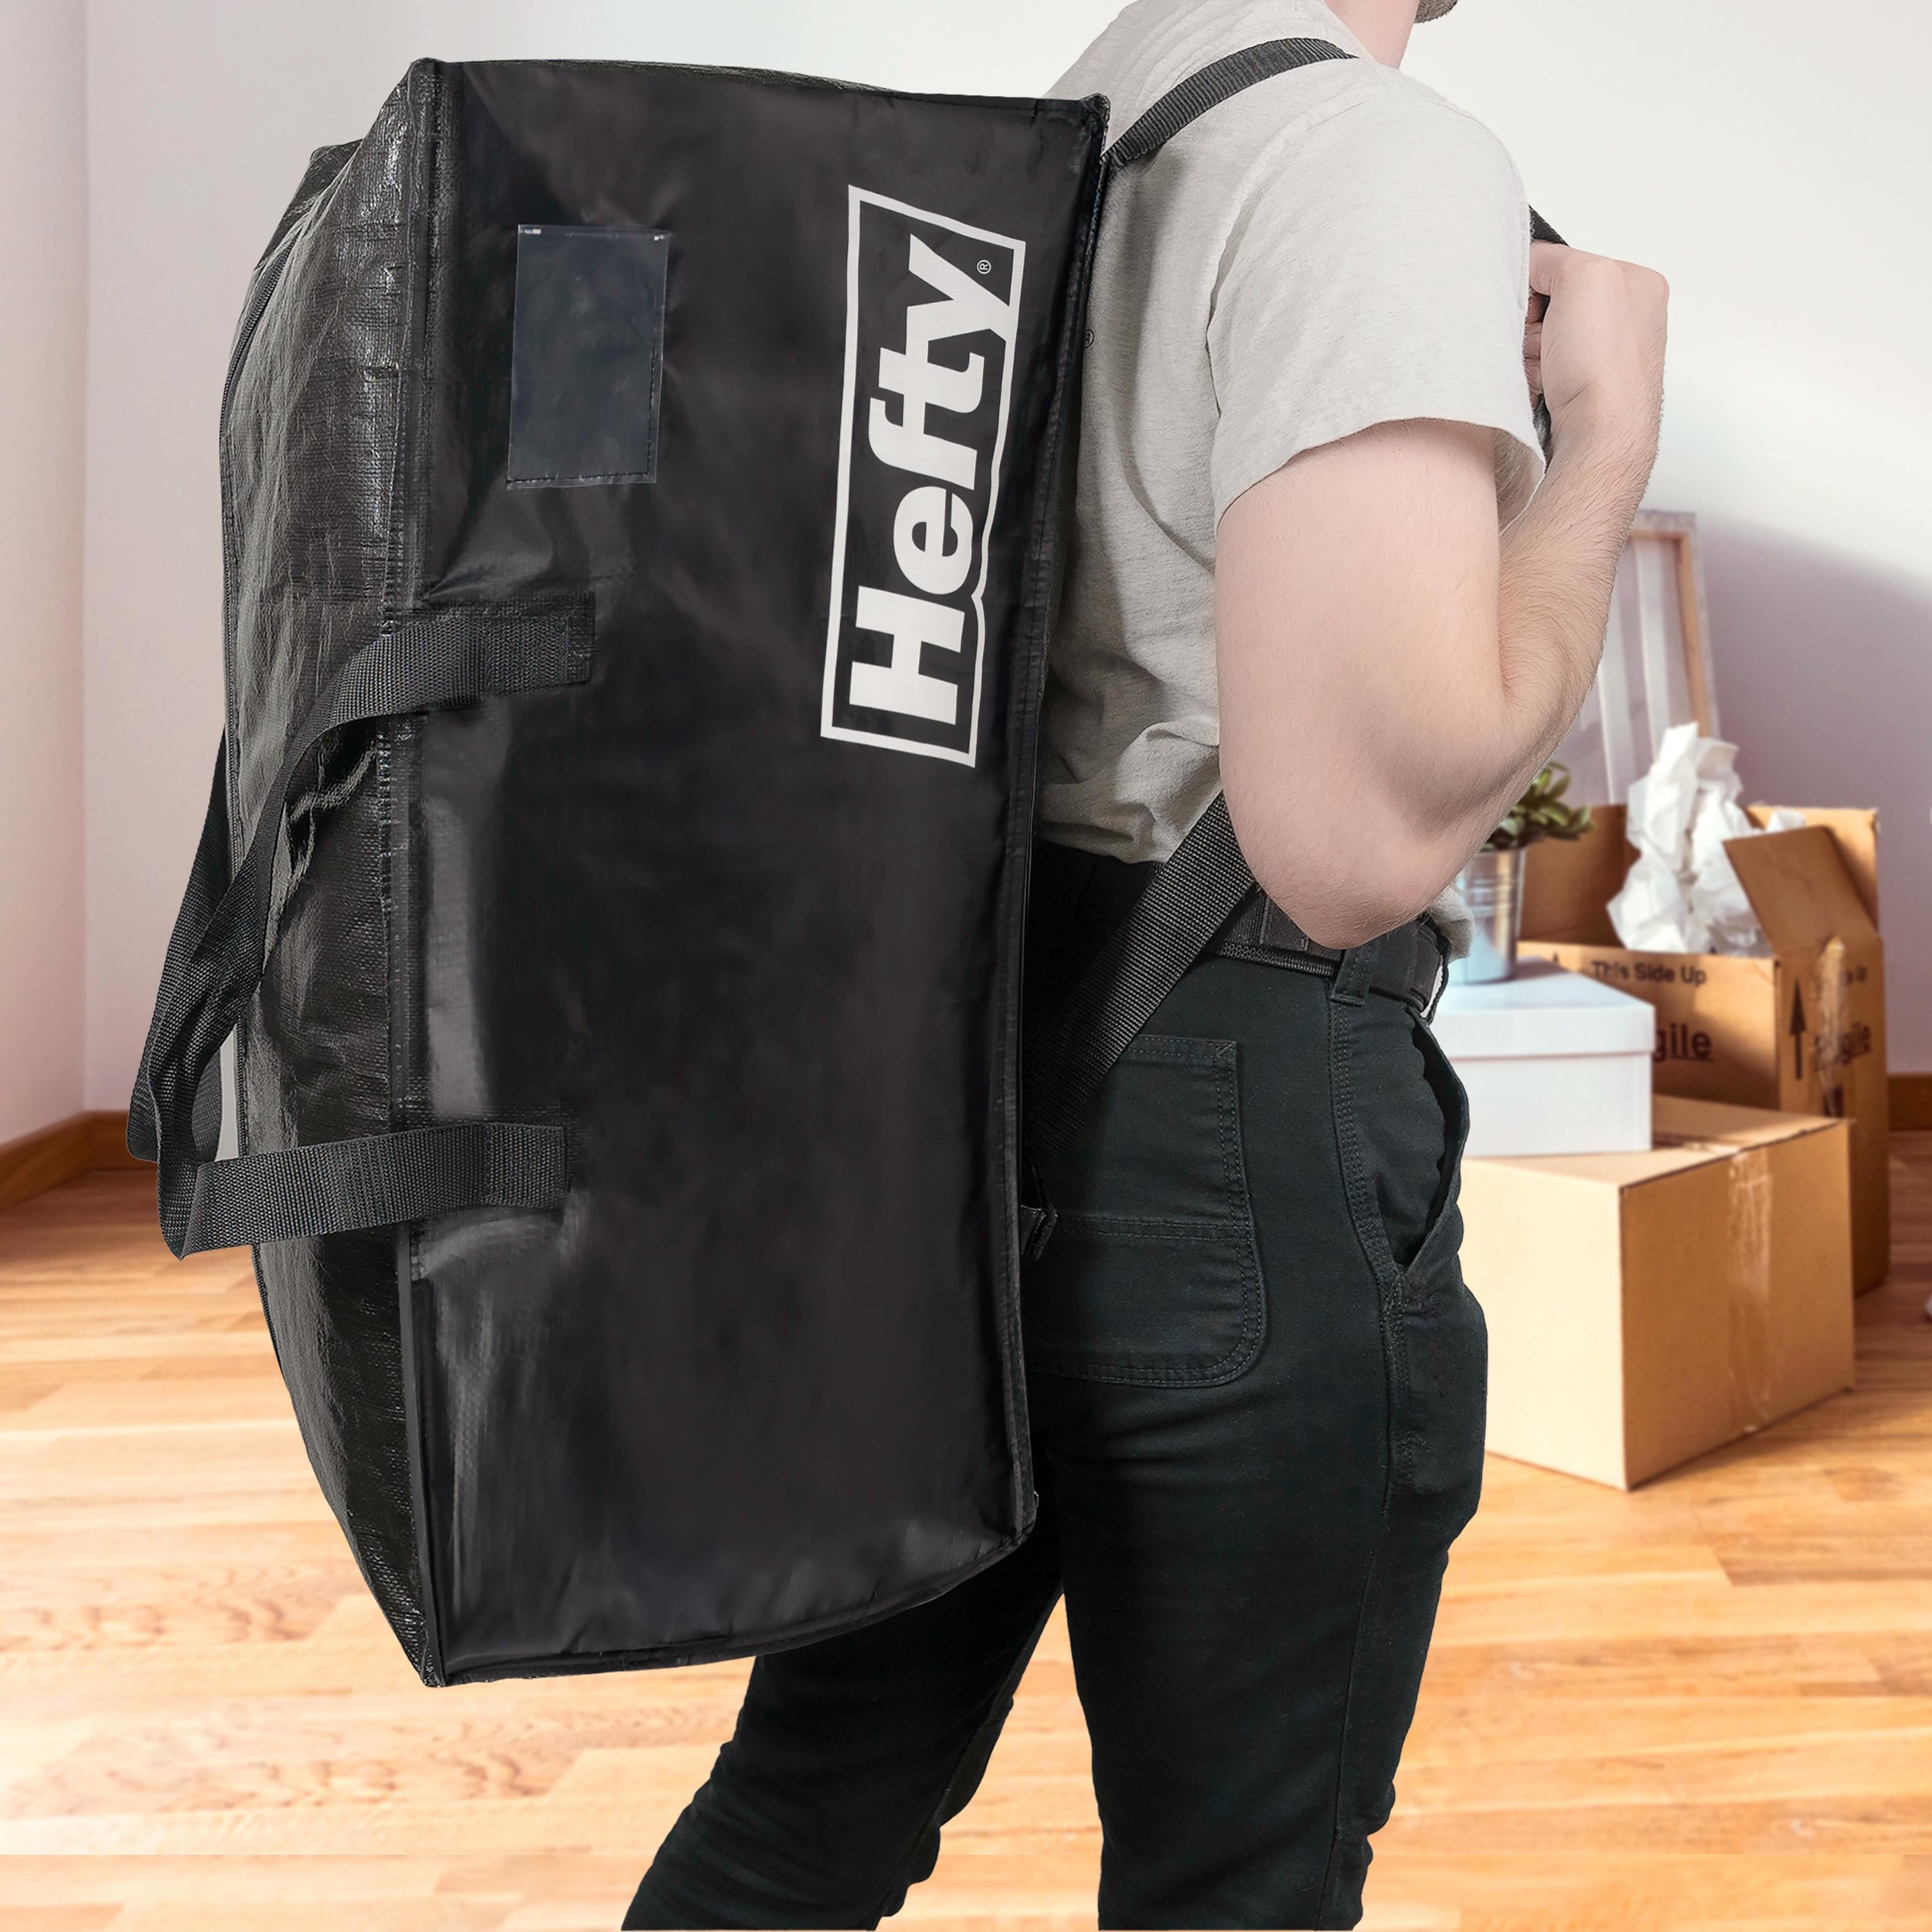 Moving anytime soon and tired of cardboard boxes? 📦 

Check out the NEW Hefty Moving Bag 🔥 These high-capacity bags are greatHefty Moving Bag 🔥 These high-capacity bags are great for storing and transporting clothes, bedding, toys, or sports equip